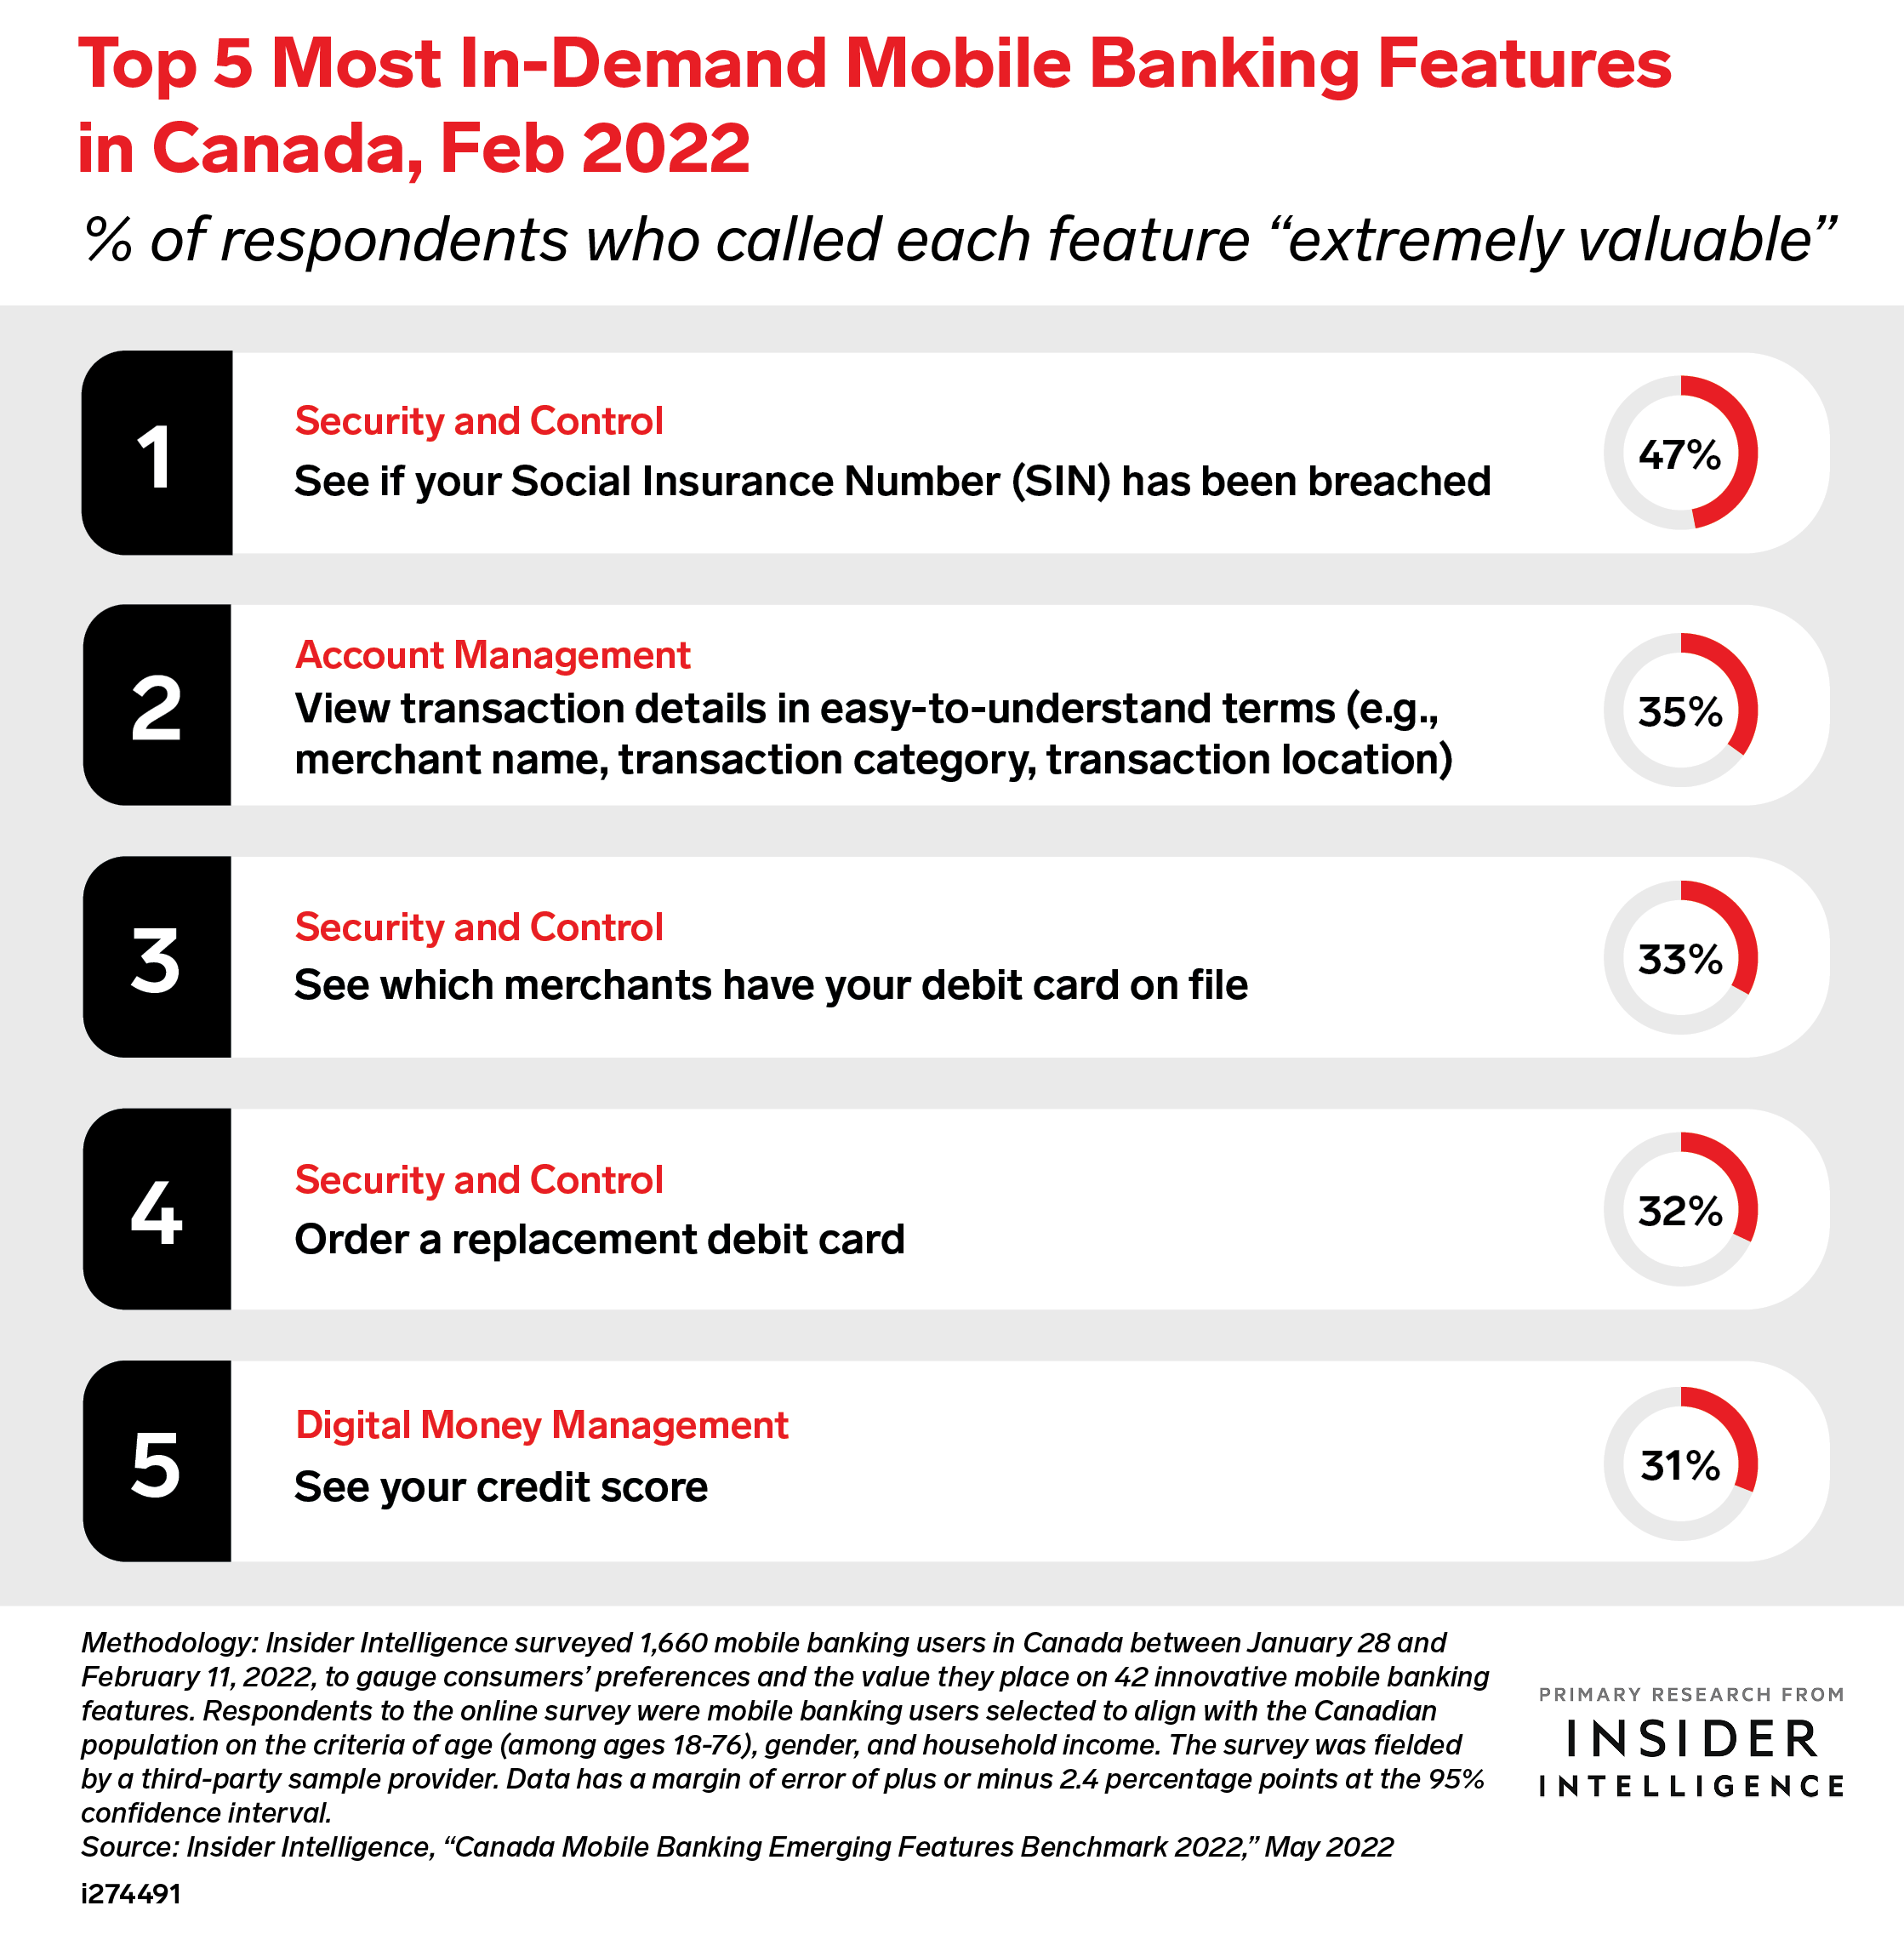 Top 5 Most In-Demand Mobile Banking Features in Canada, Feb 2022 (% of respondents who called each feature 